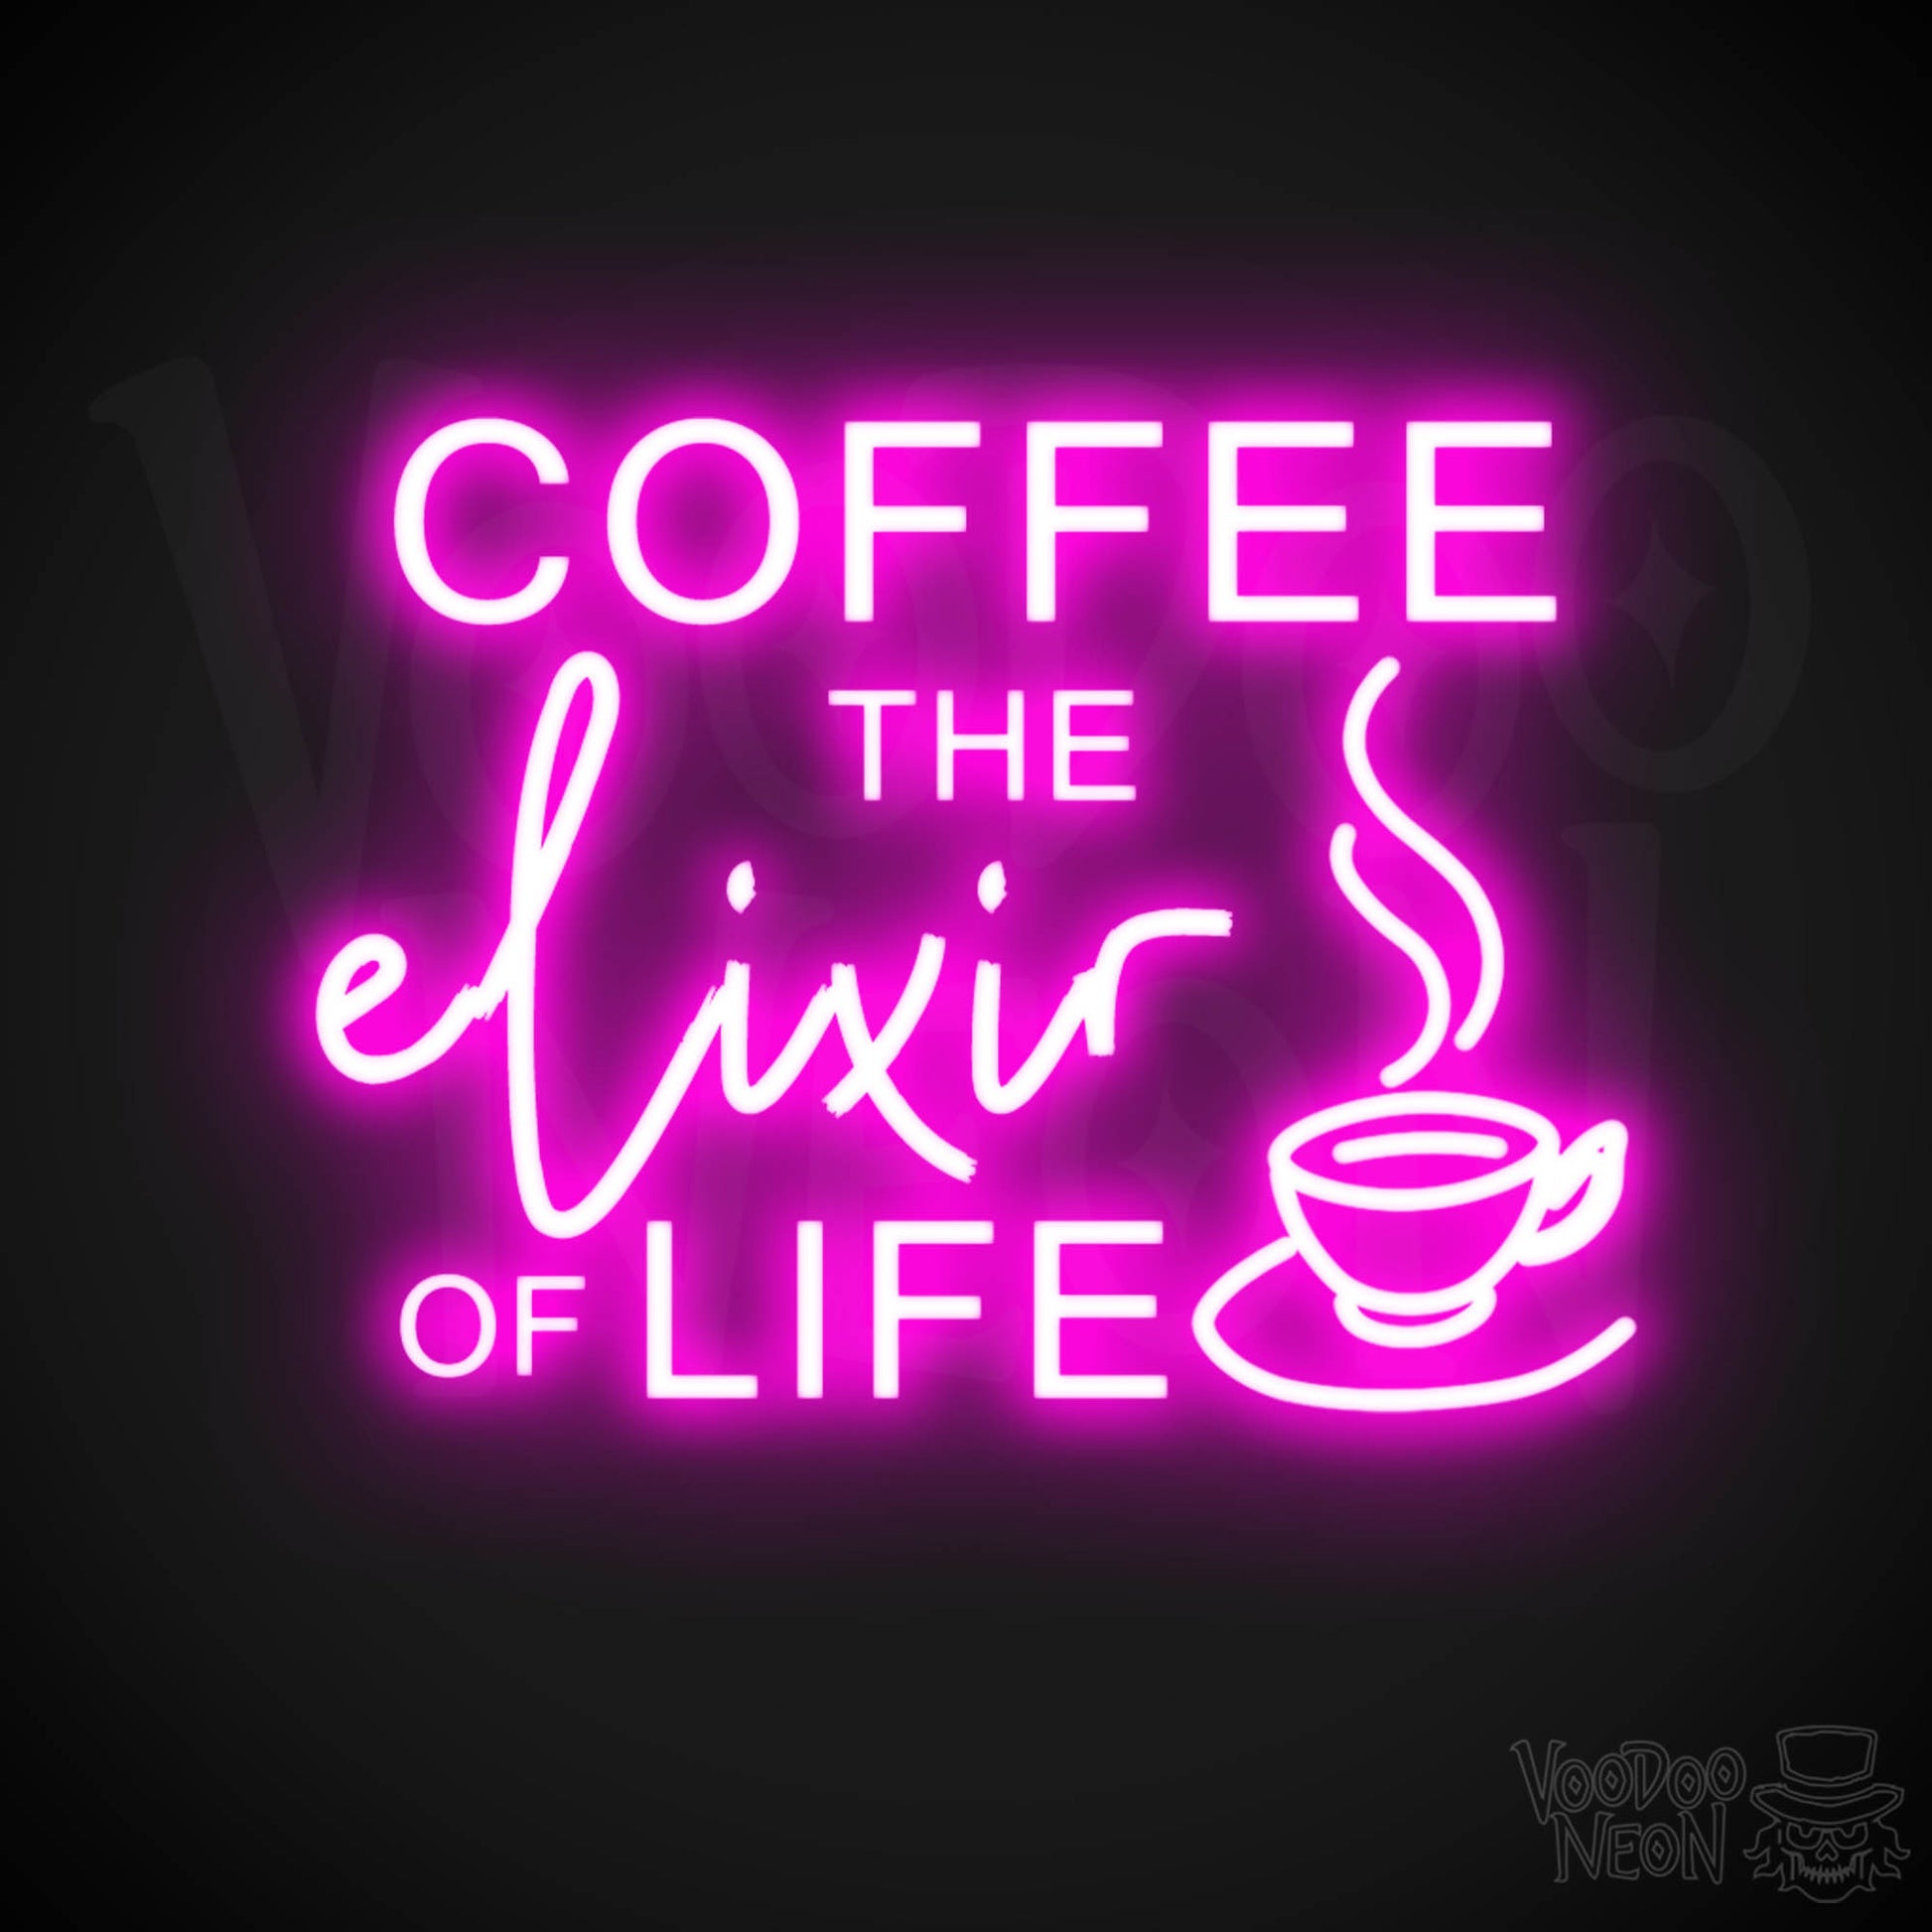 Coffee - The Elixir Of Life Neon Sign - The Elixir Of Life Sign - Color Pink